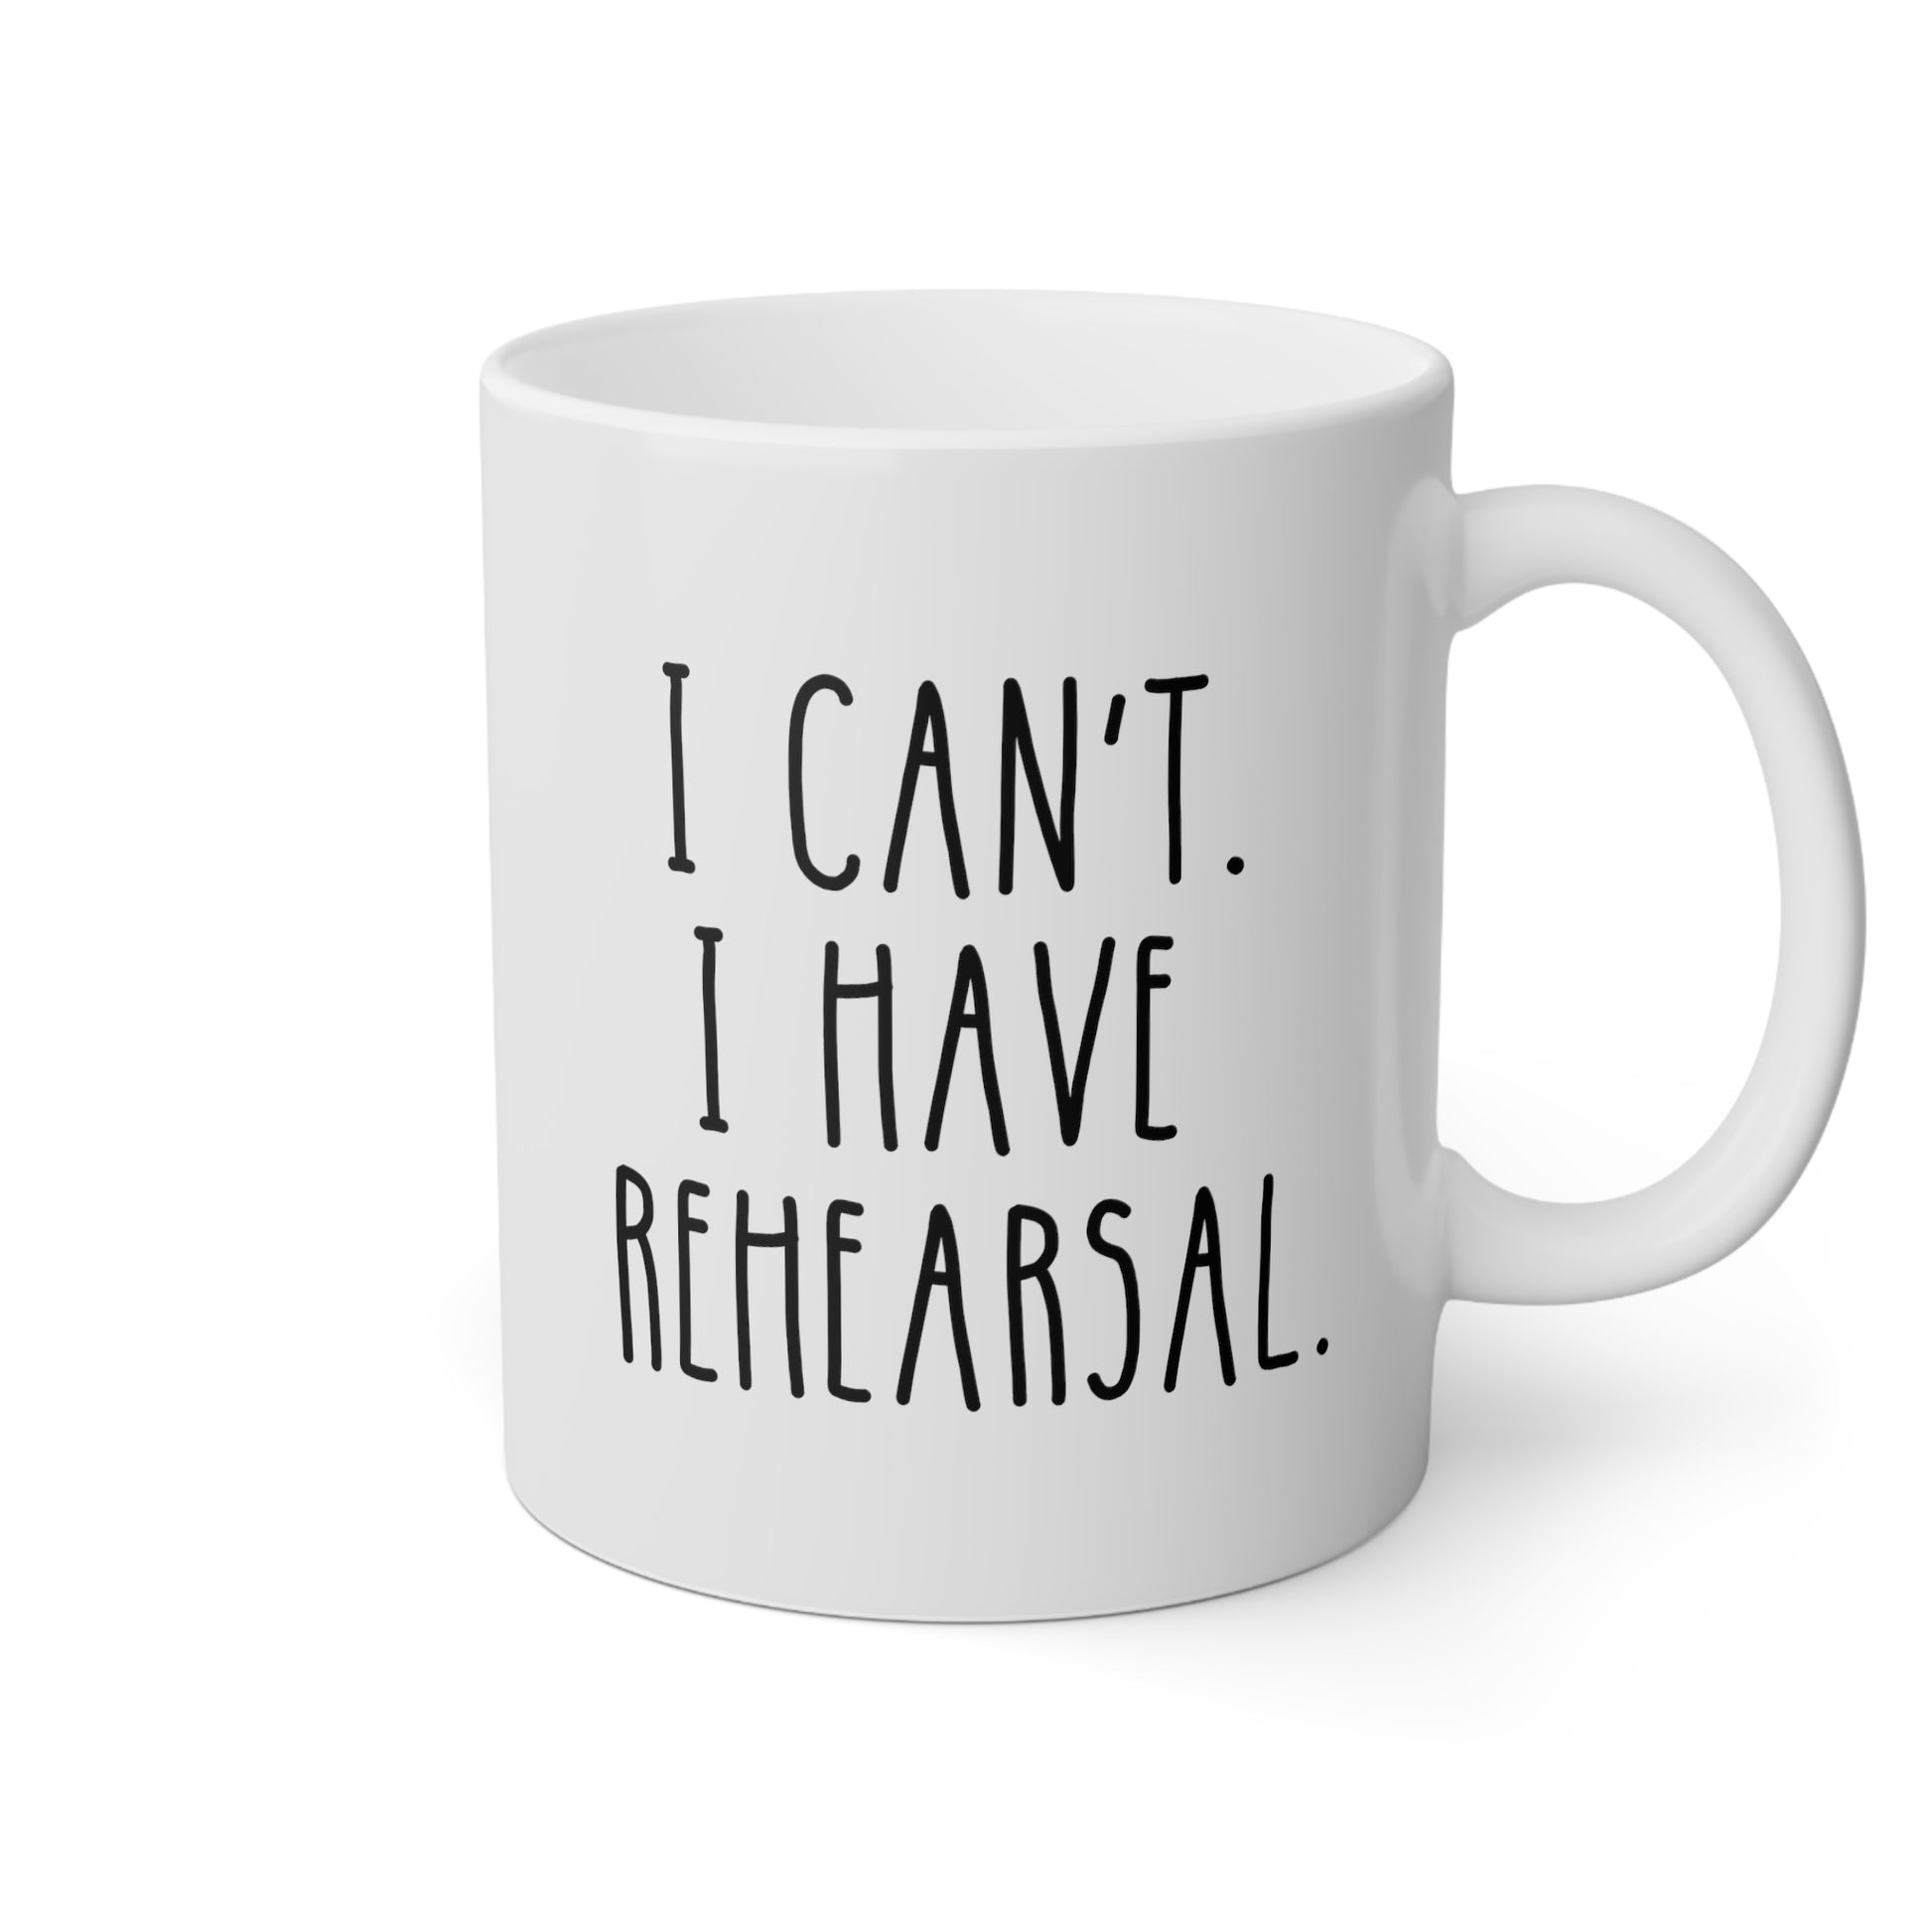 I Can't. I Have Rehearsal. 11oz white funny large coffee mug gift for theater actor actress dancer band singer waveywares wavey wares wavywares wavy wares